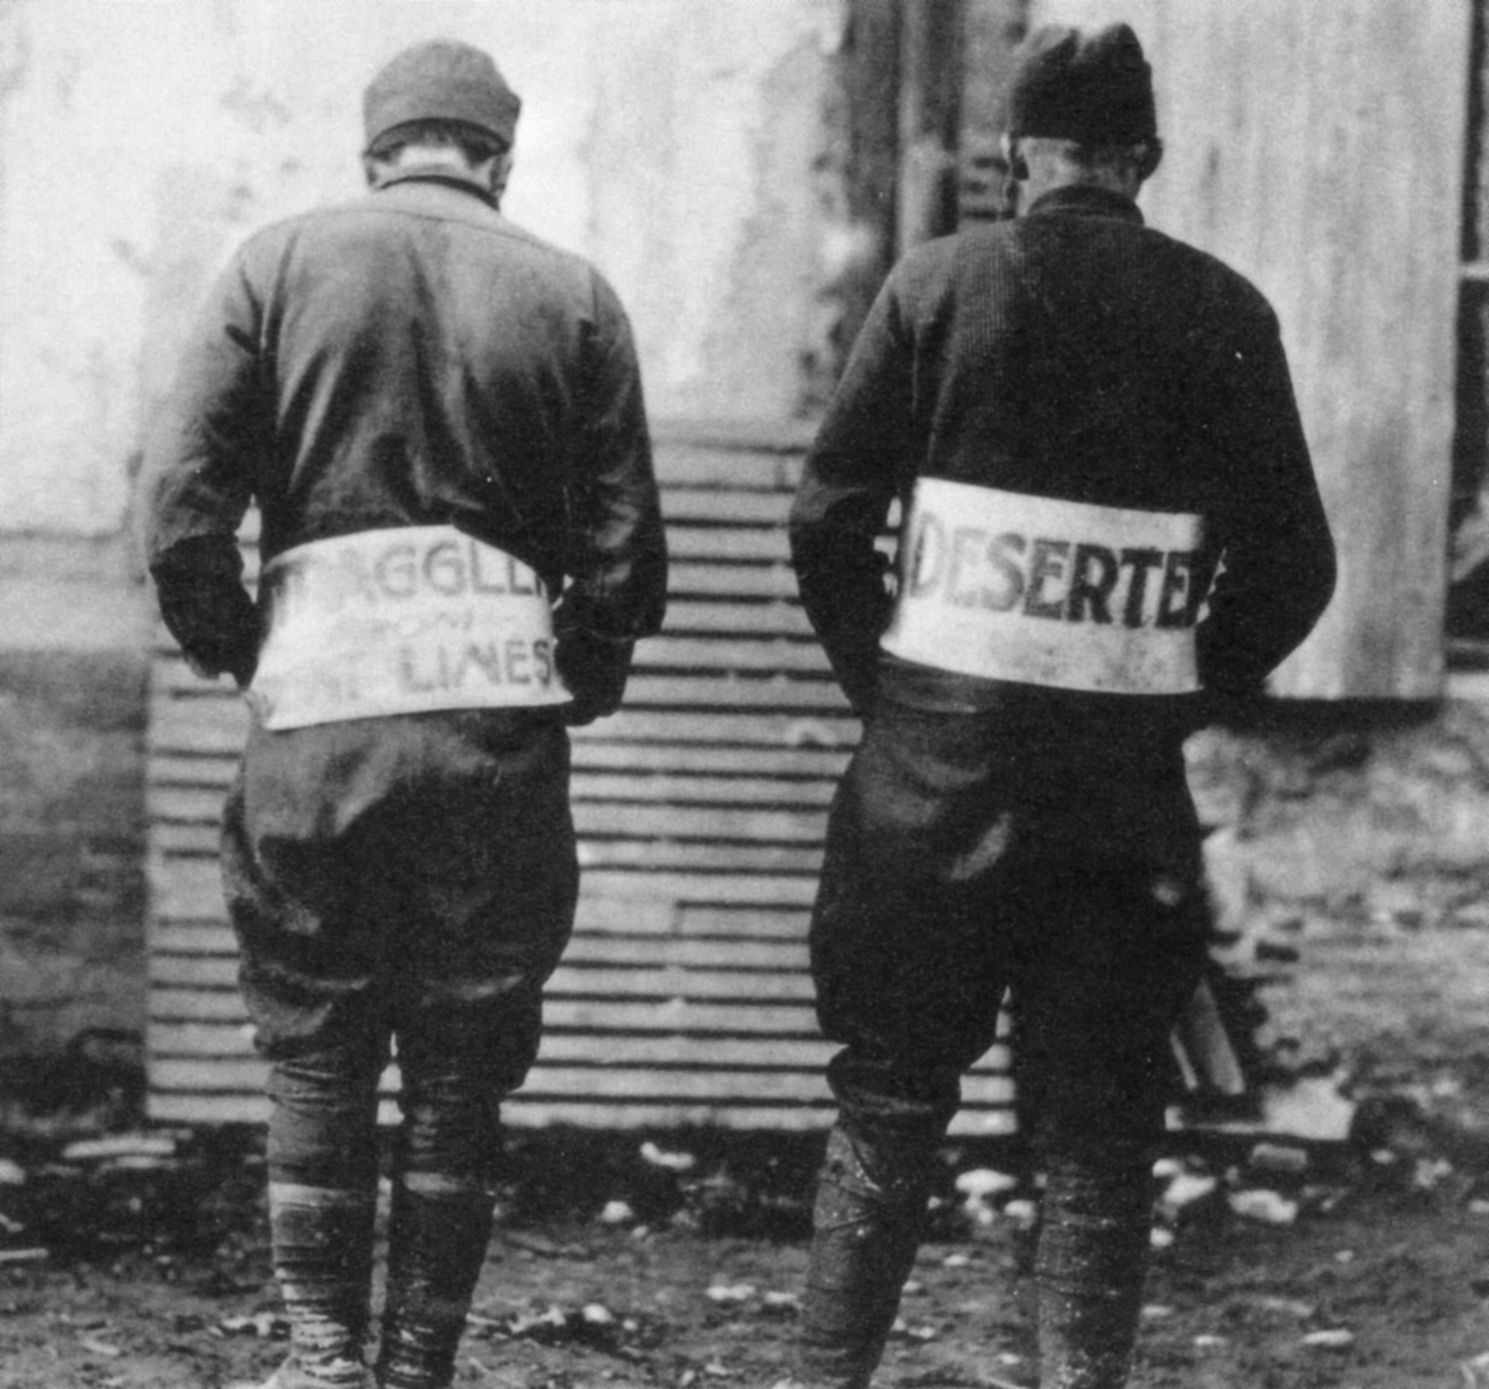 Twenty-four American deserters were sentenced to death in World War I, but none was executed. Here a straggler and a deserter are publicly humiliated at Florient.